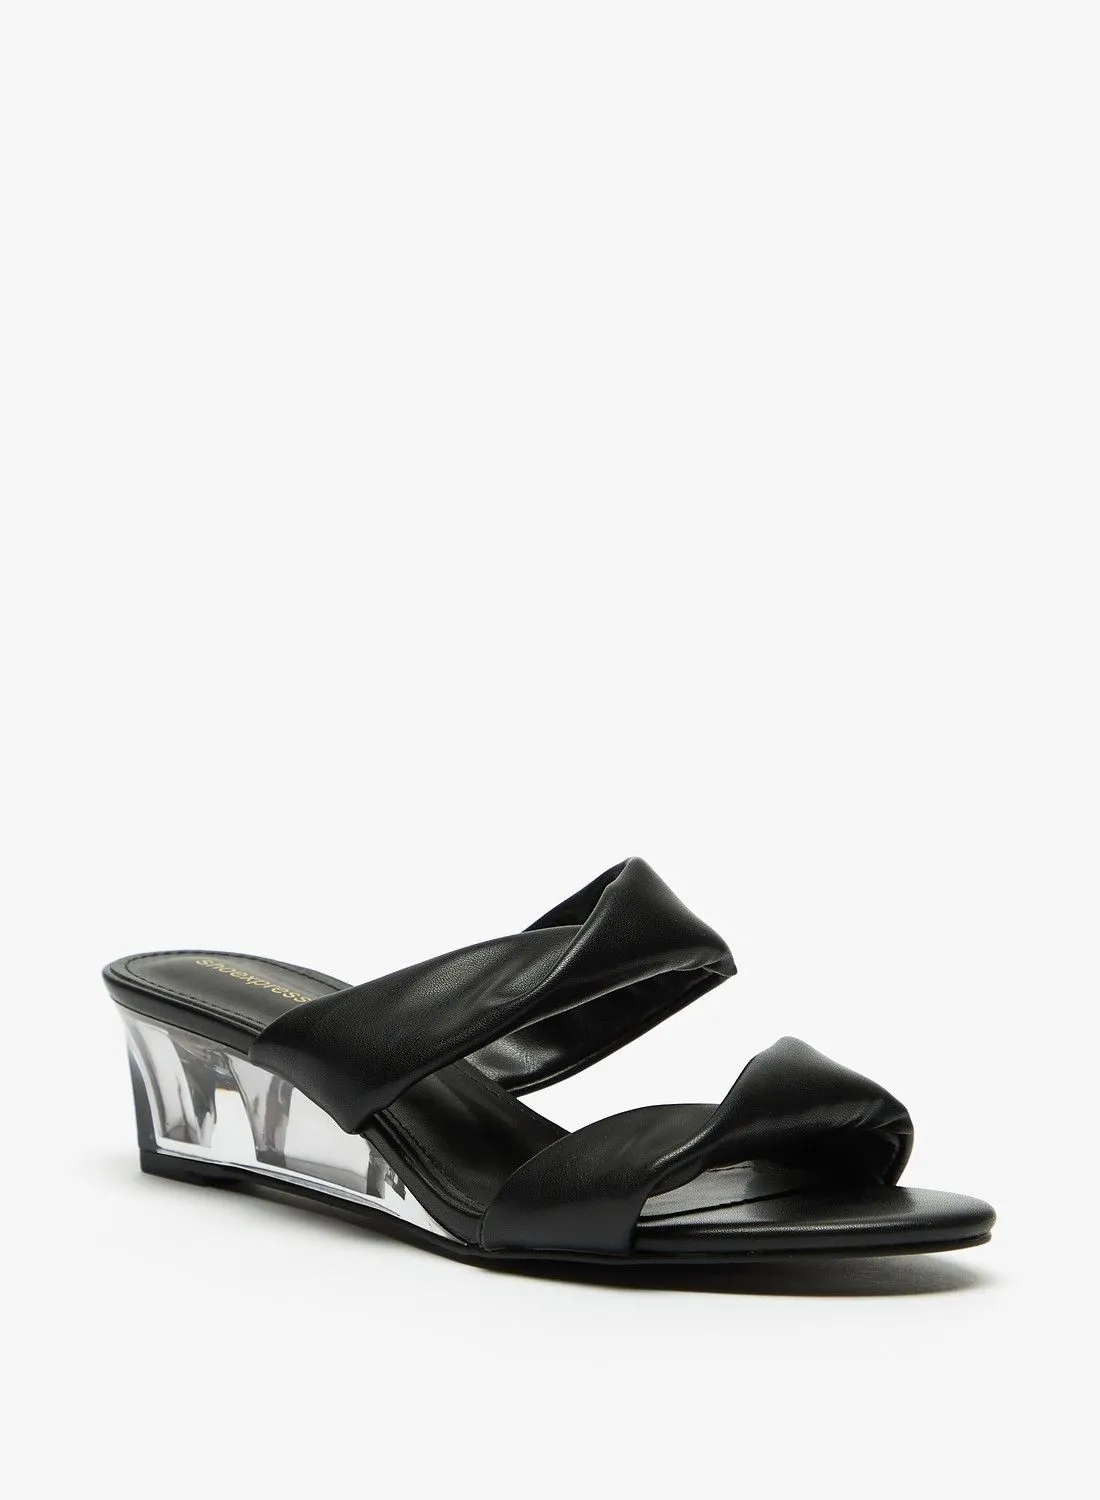 shoexpress Strappy Open Toe Slip-On Sandals with Wedge Heels Black